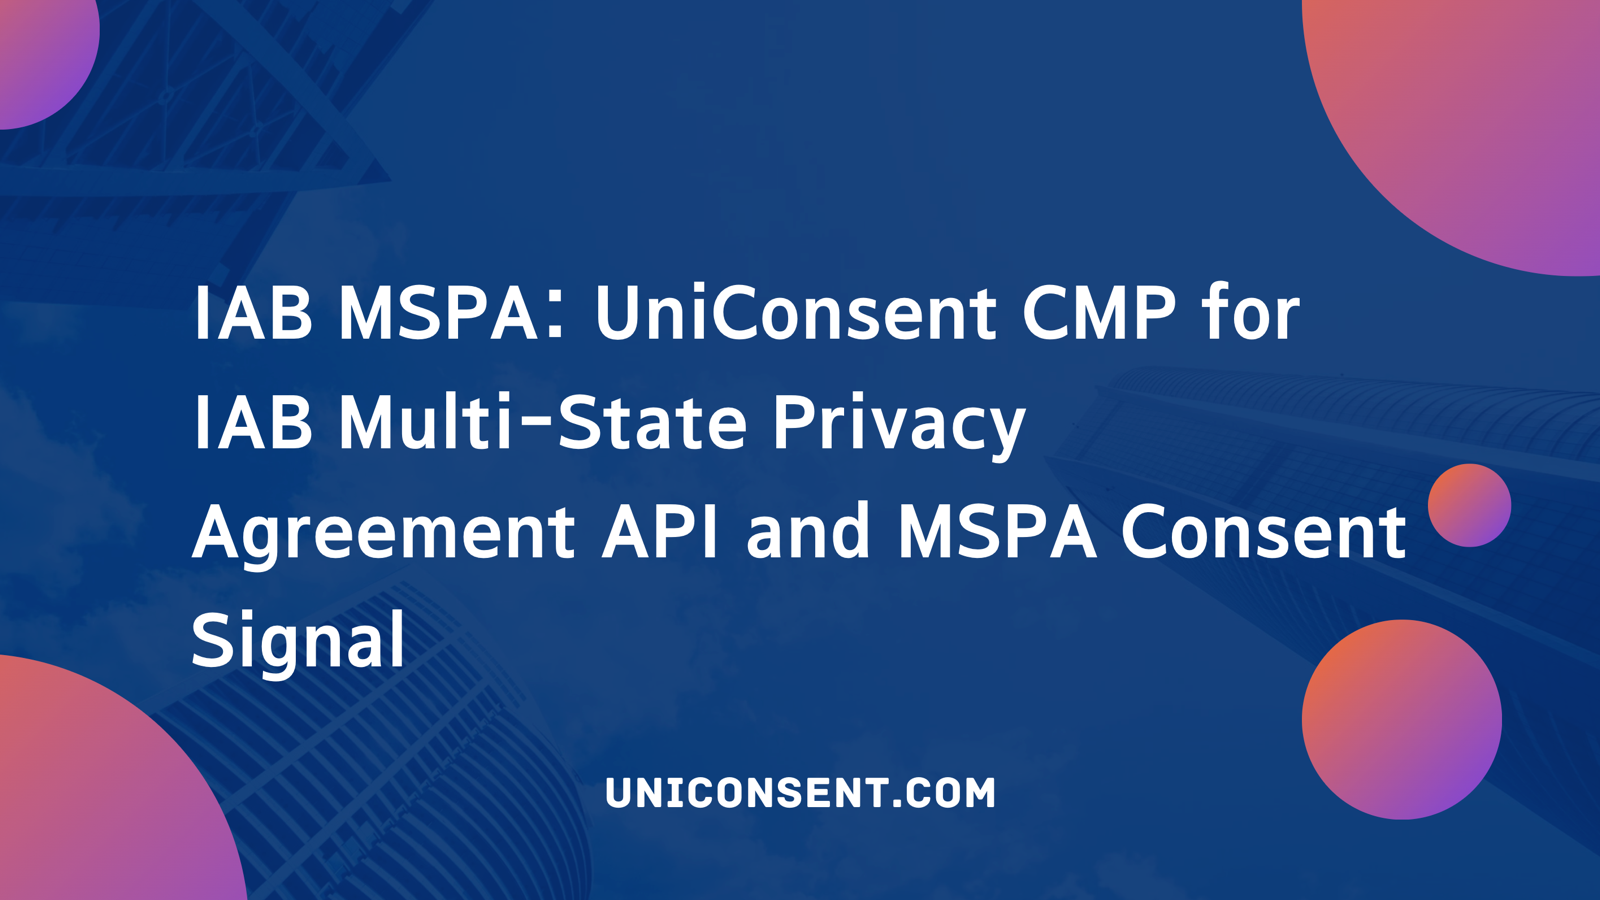 IAB MSPA: Support IAB Multi-State Privacy Agreement API in UniConsent CMP